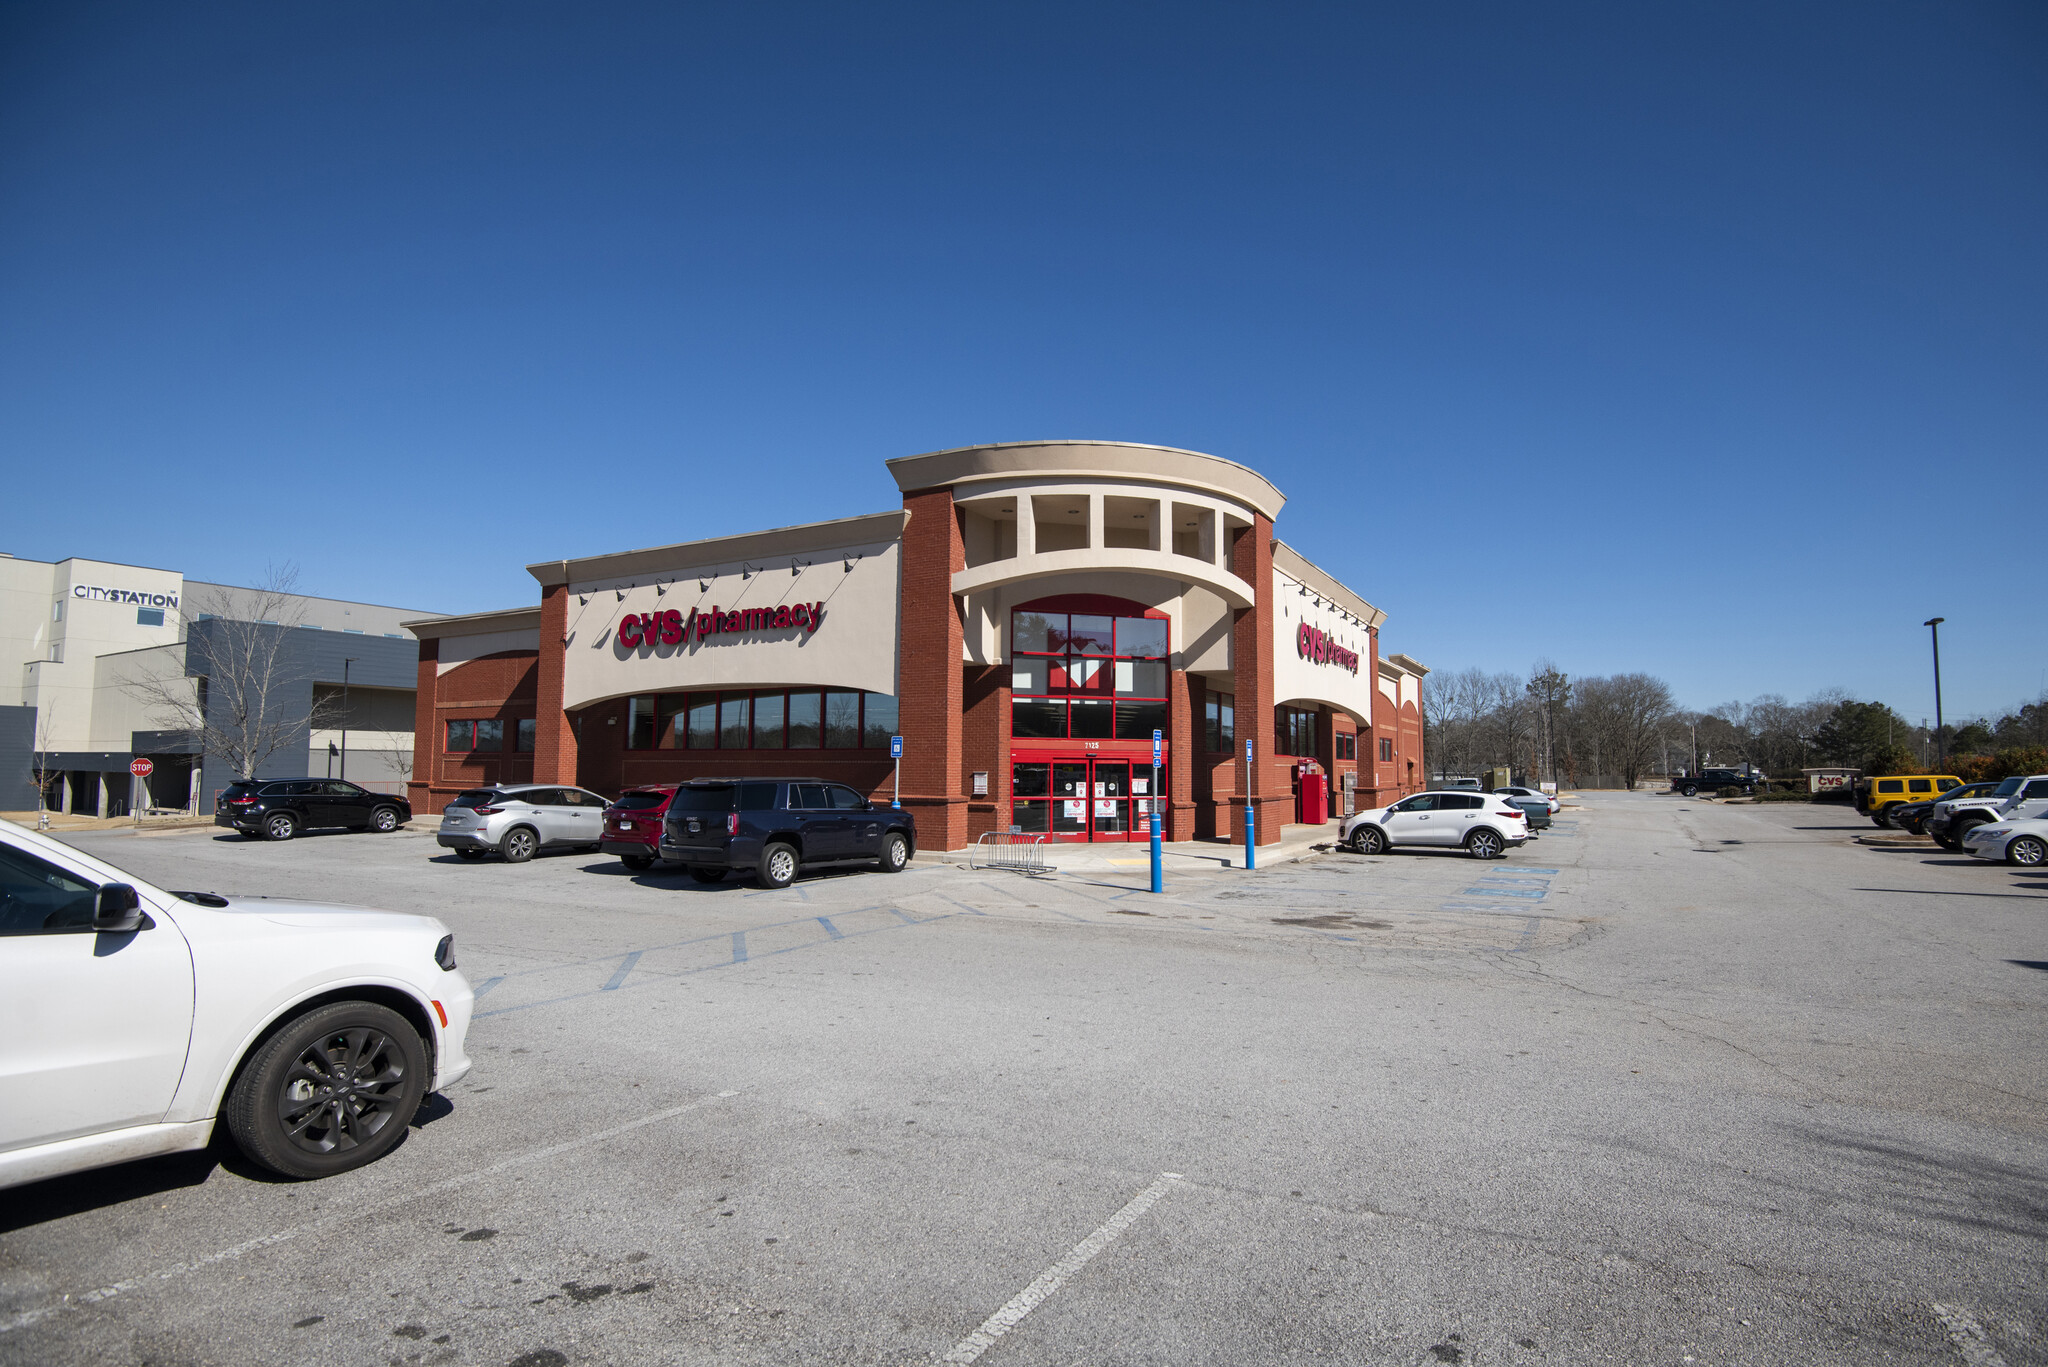 Avison Young brokers $4.9 million sale of single-tenant retail property occupied by CVS in Carrollton, GA